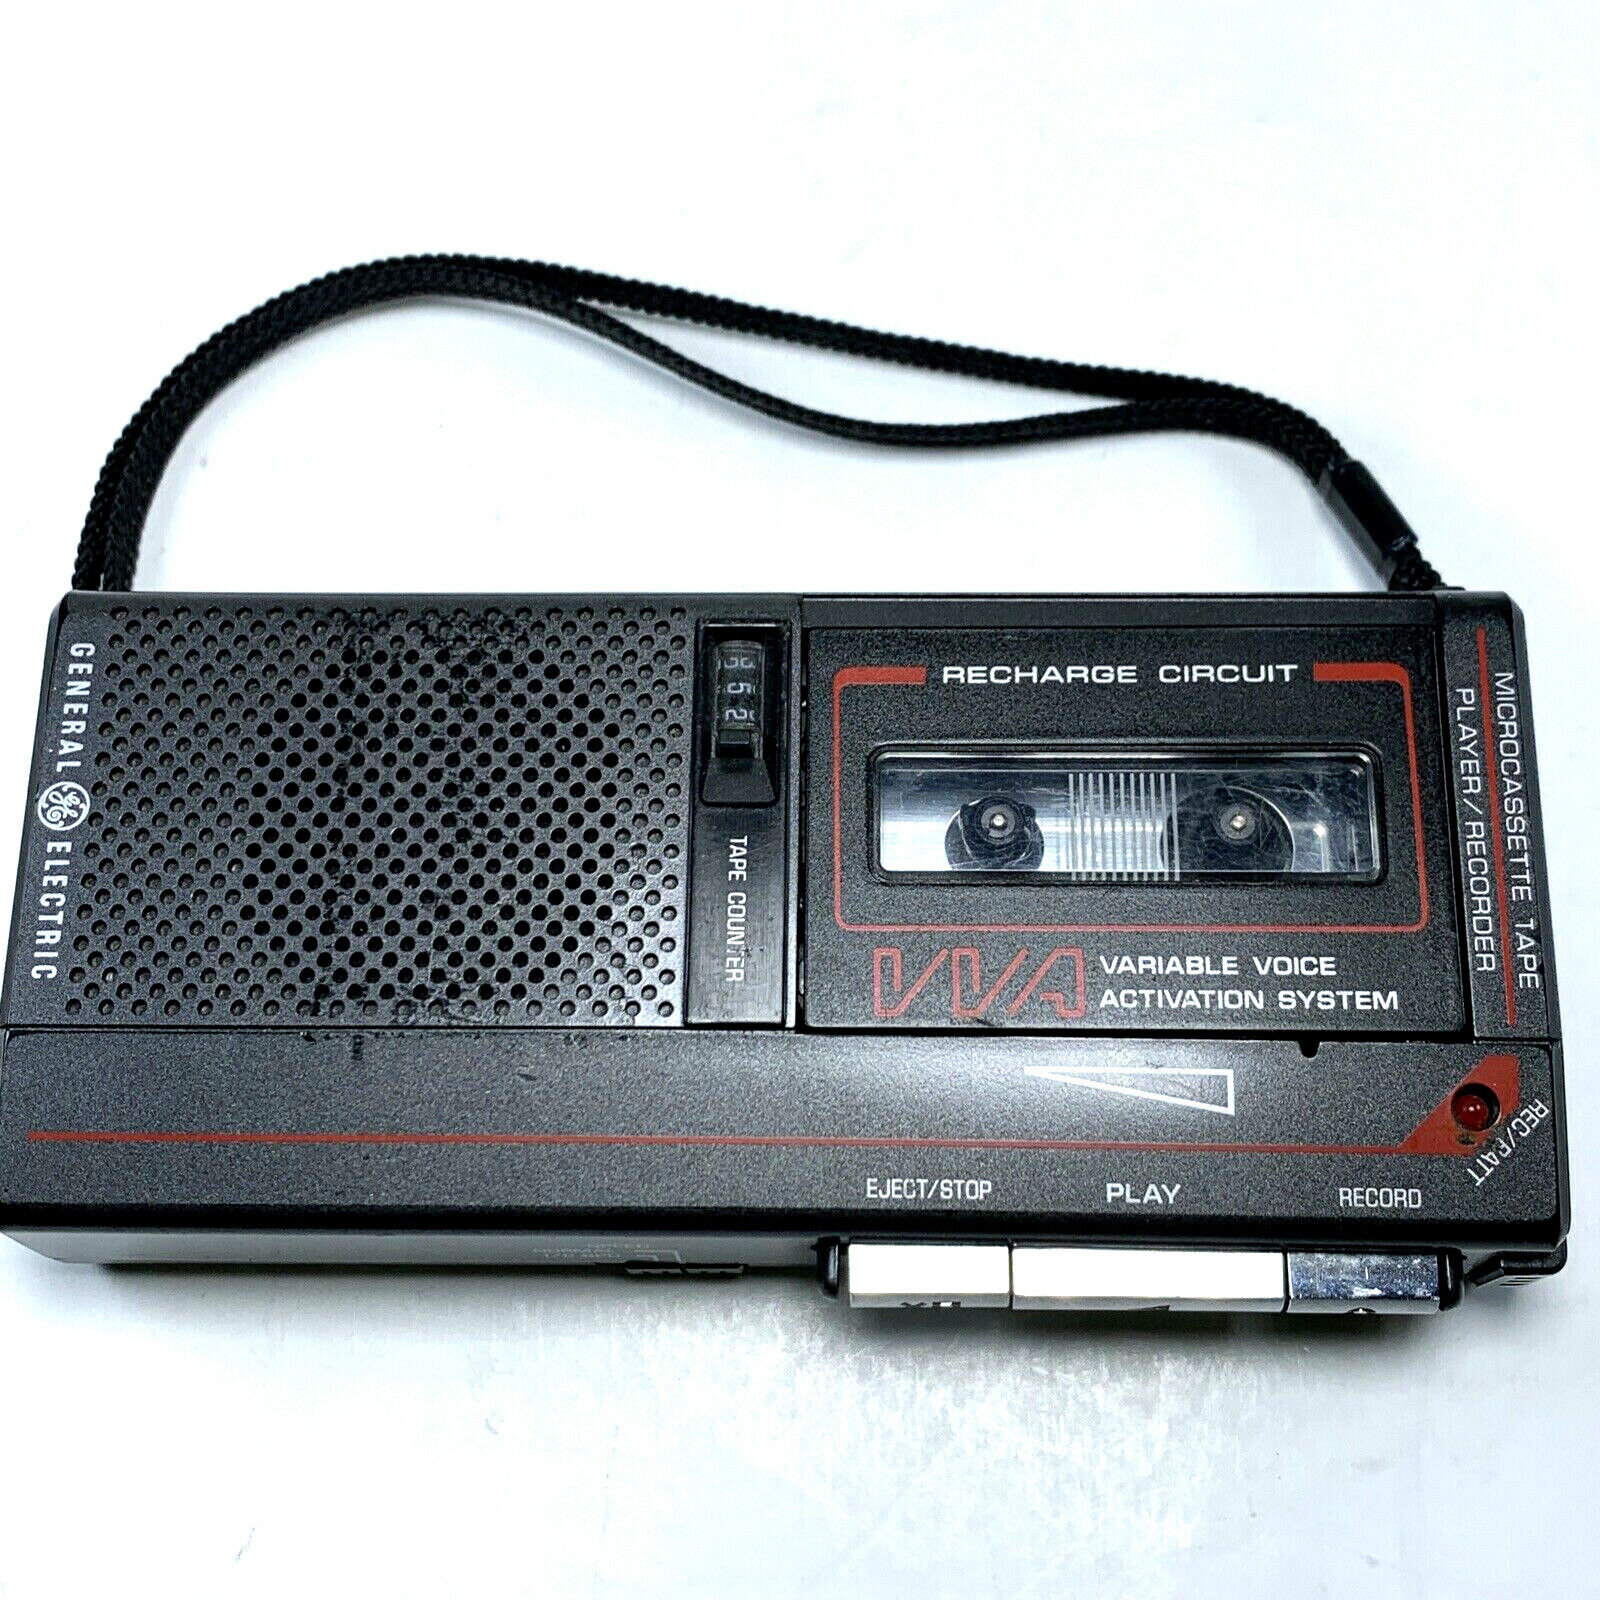 General Electric Micro Cassette Tape Our shop most Max 64% OFF popular GE Player Recorder 3-5326A